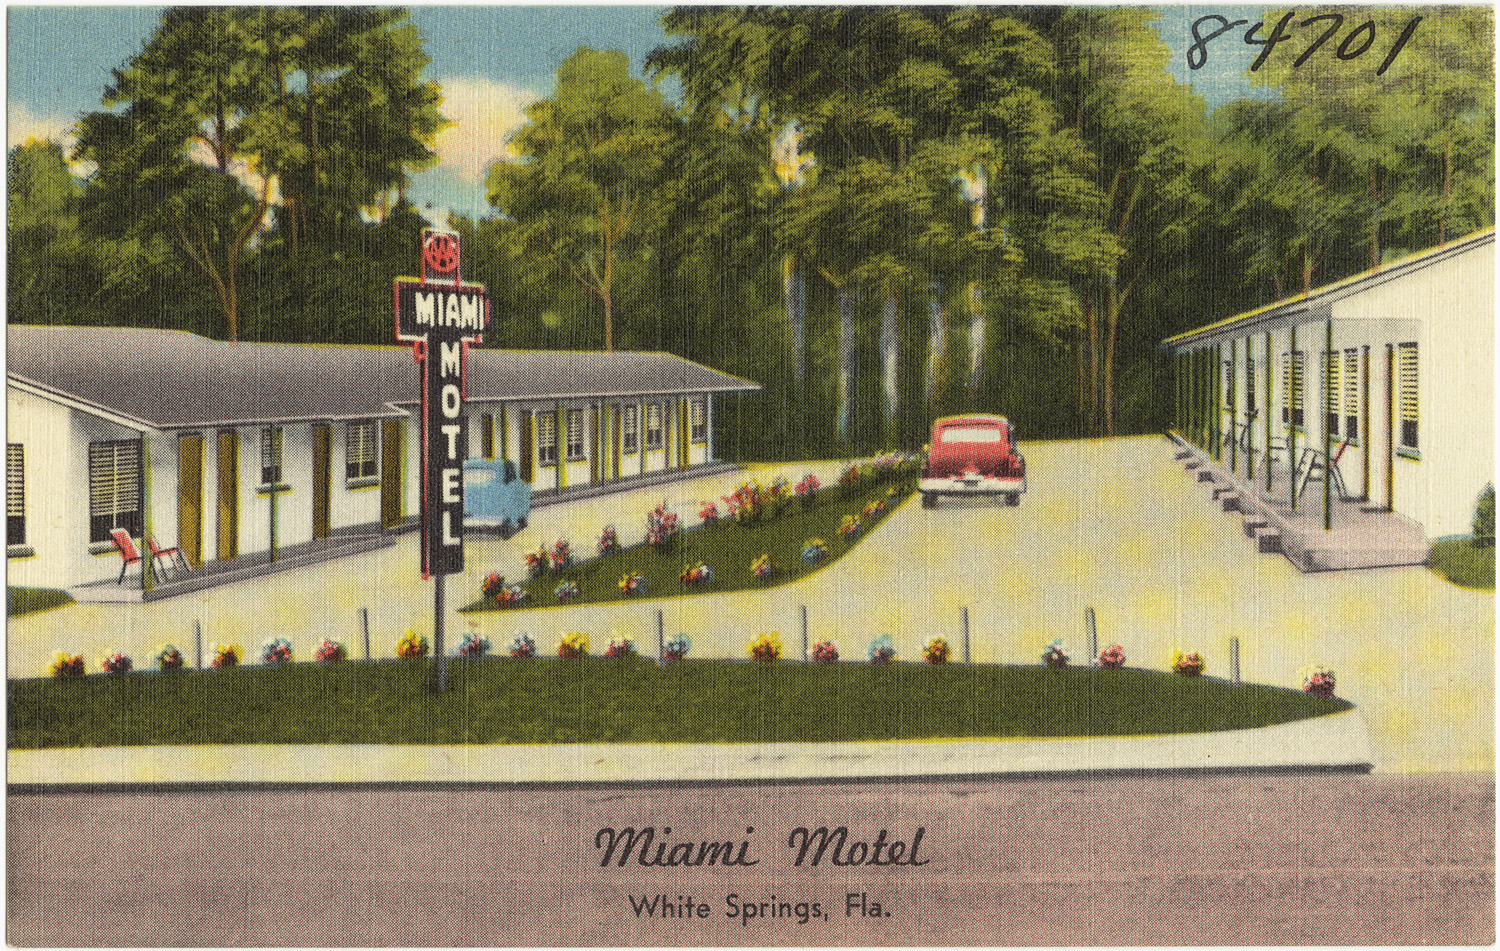 the motel is located across from a lot of trees